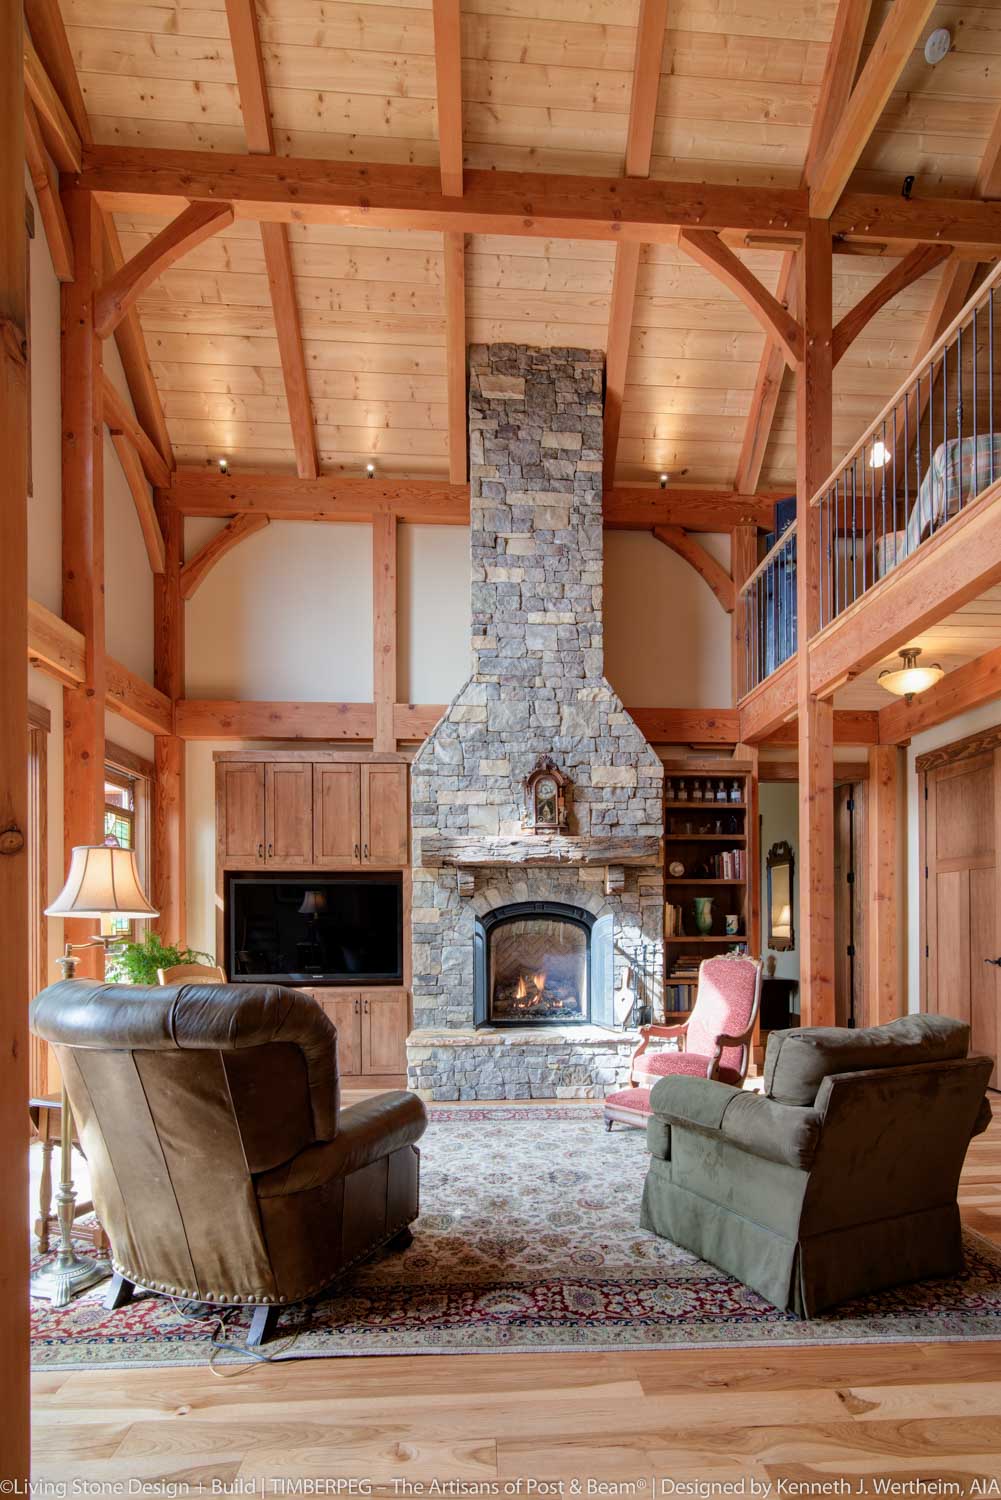 Peach Tree Knob fireplace and cathedral ceiling great room